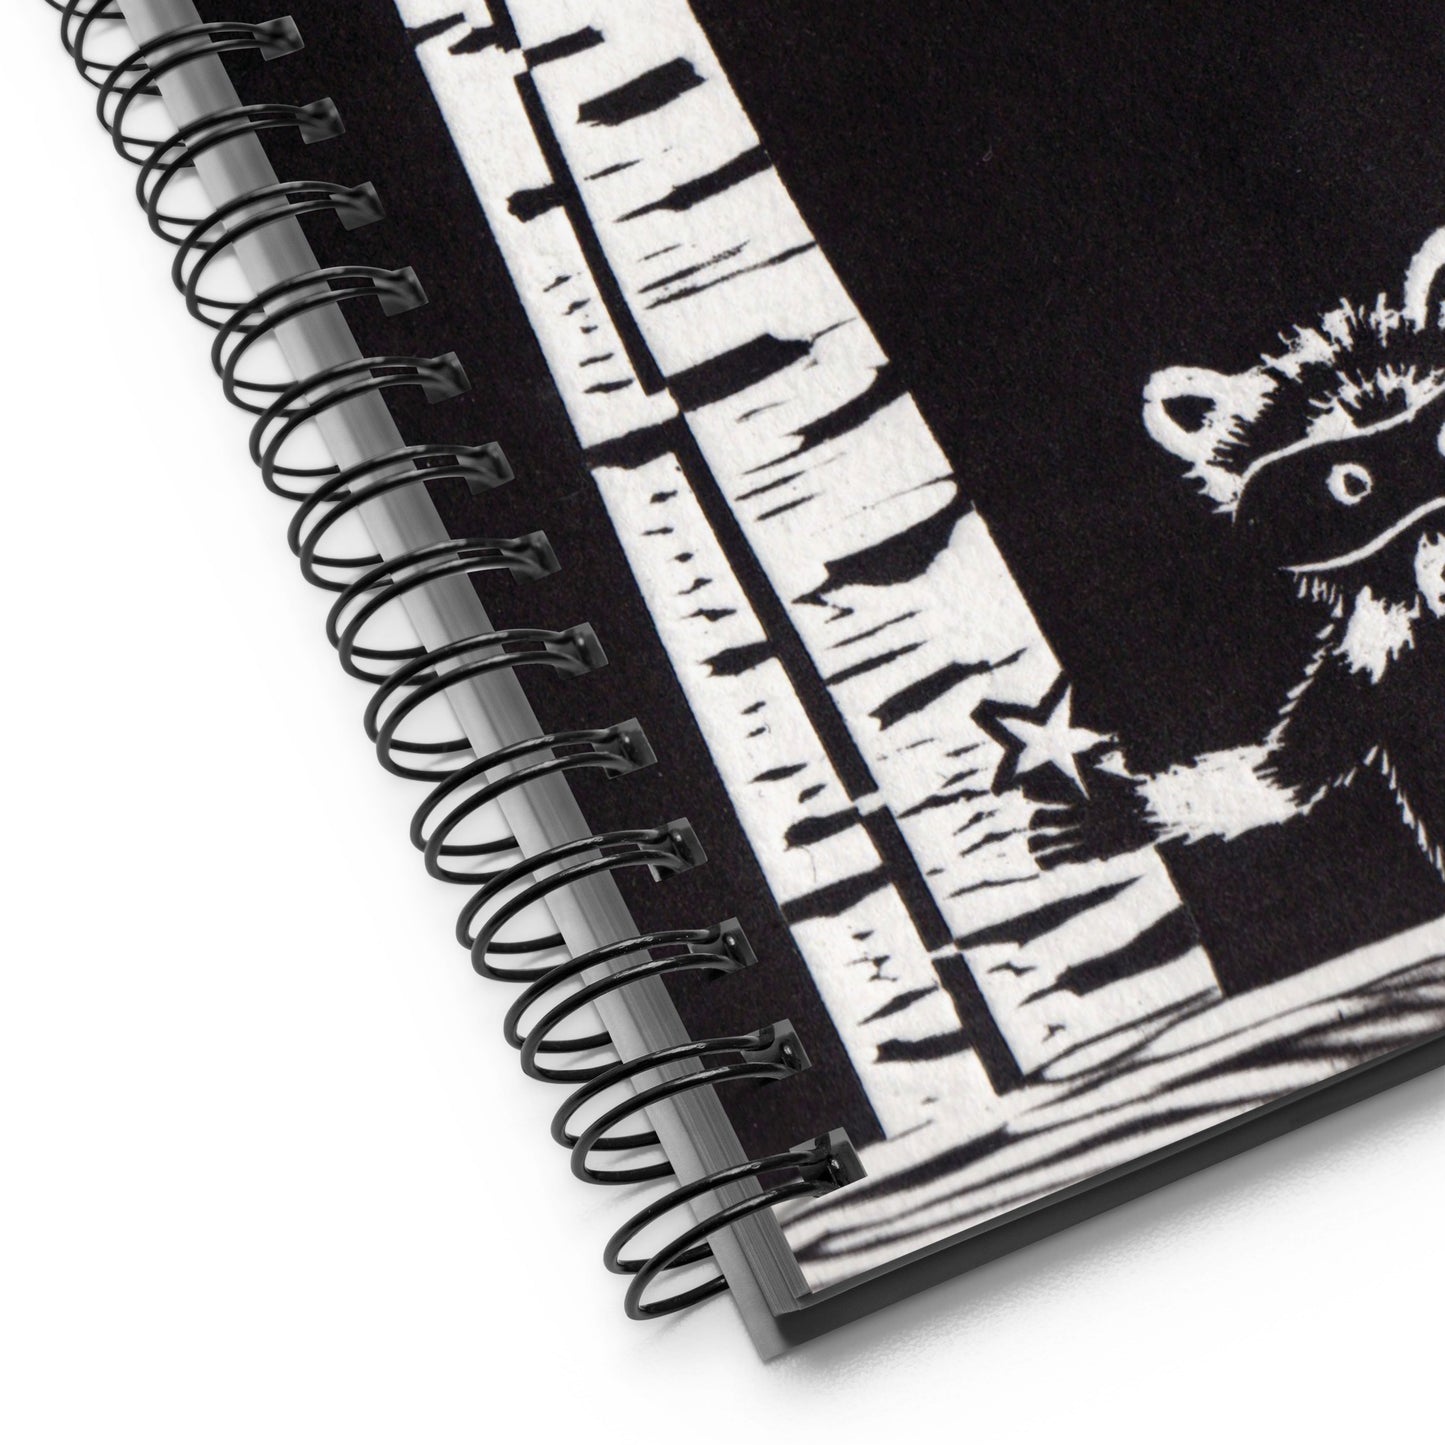 A notebook with a black and white image of a raccoon, trees and stars